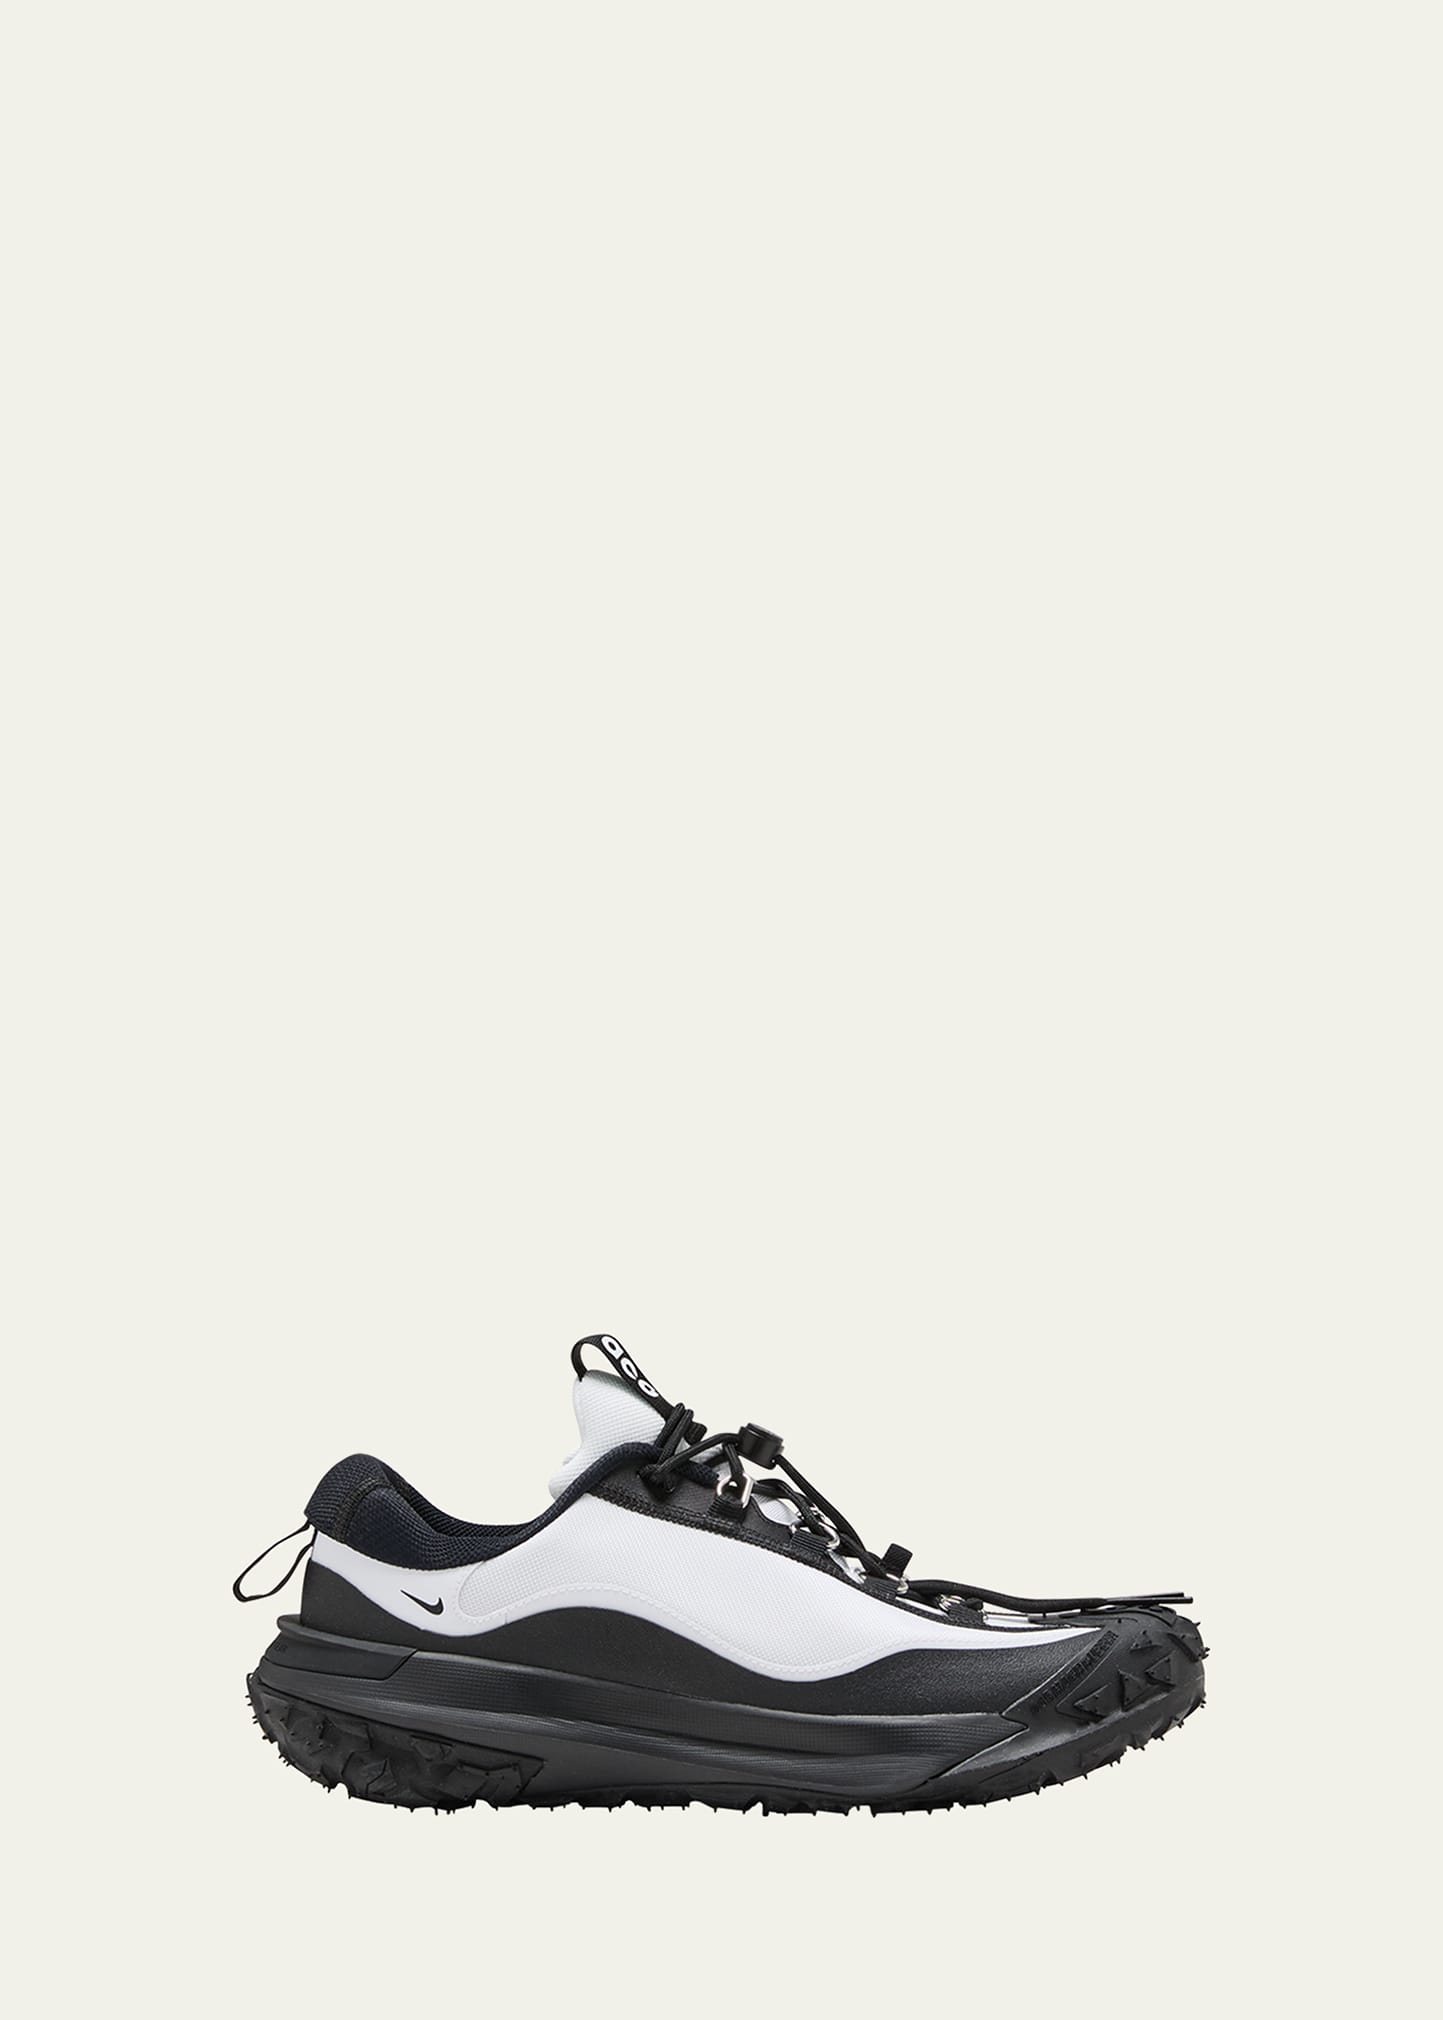 COMME DES GARCONS HOMME PLUS x Nike Men's ACG Mountain Fly 2 GORE-TEX Runner Sneakers